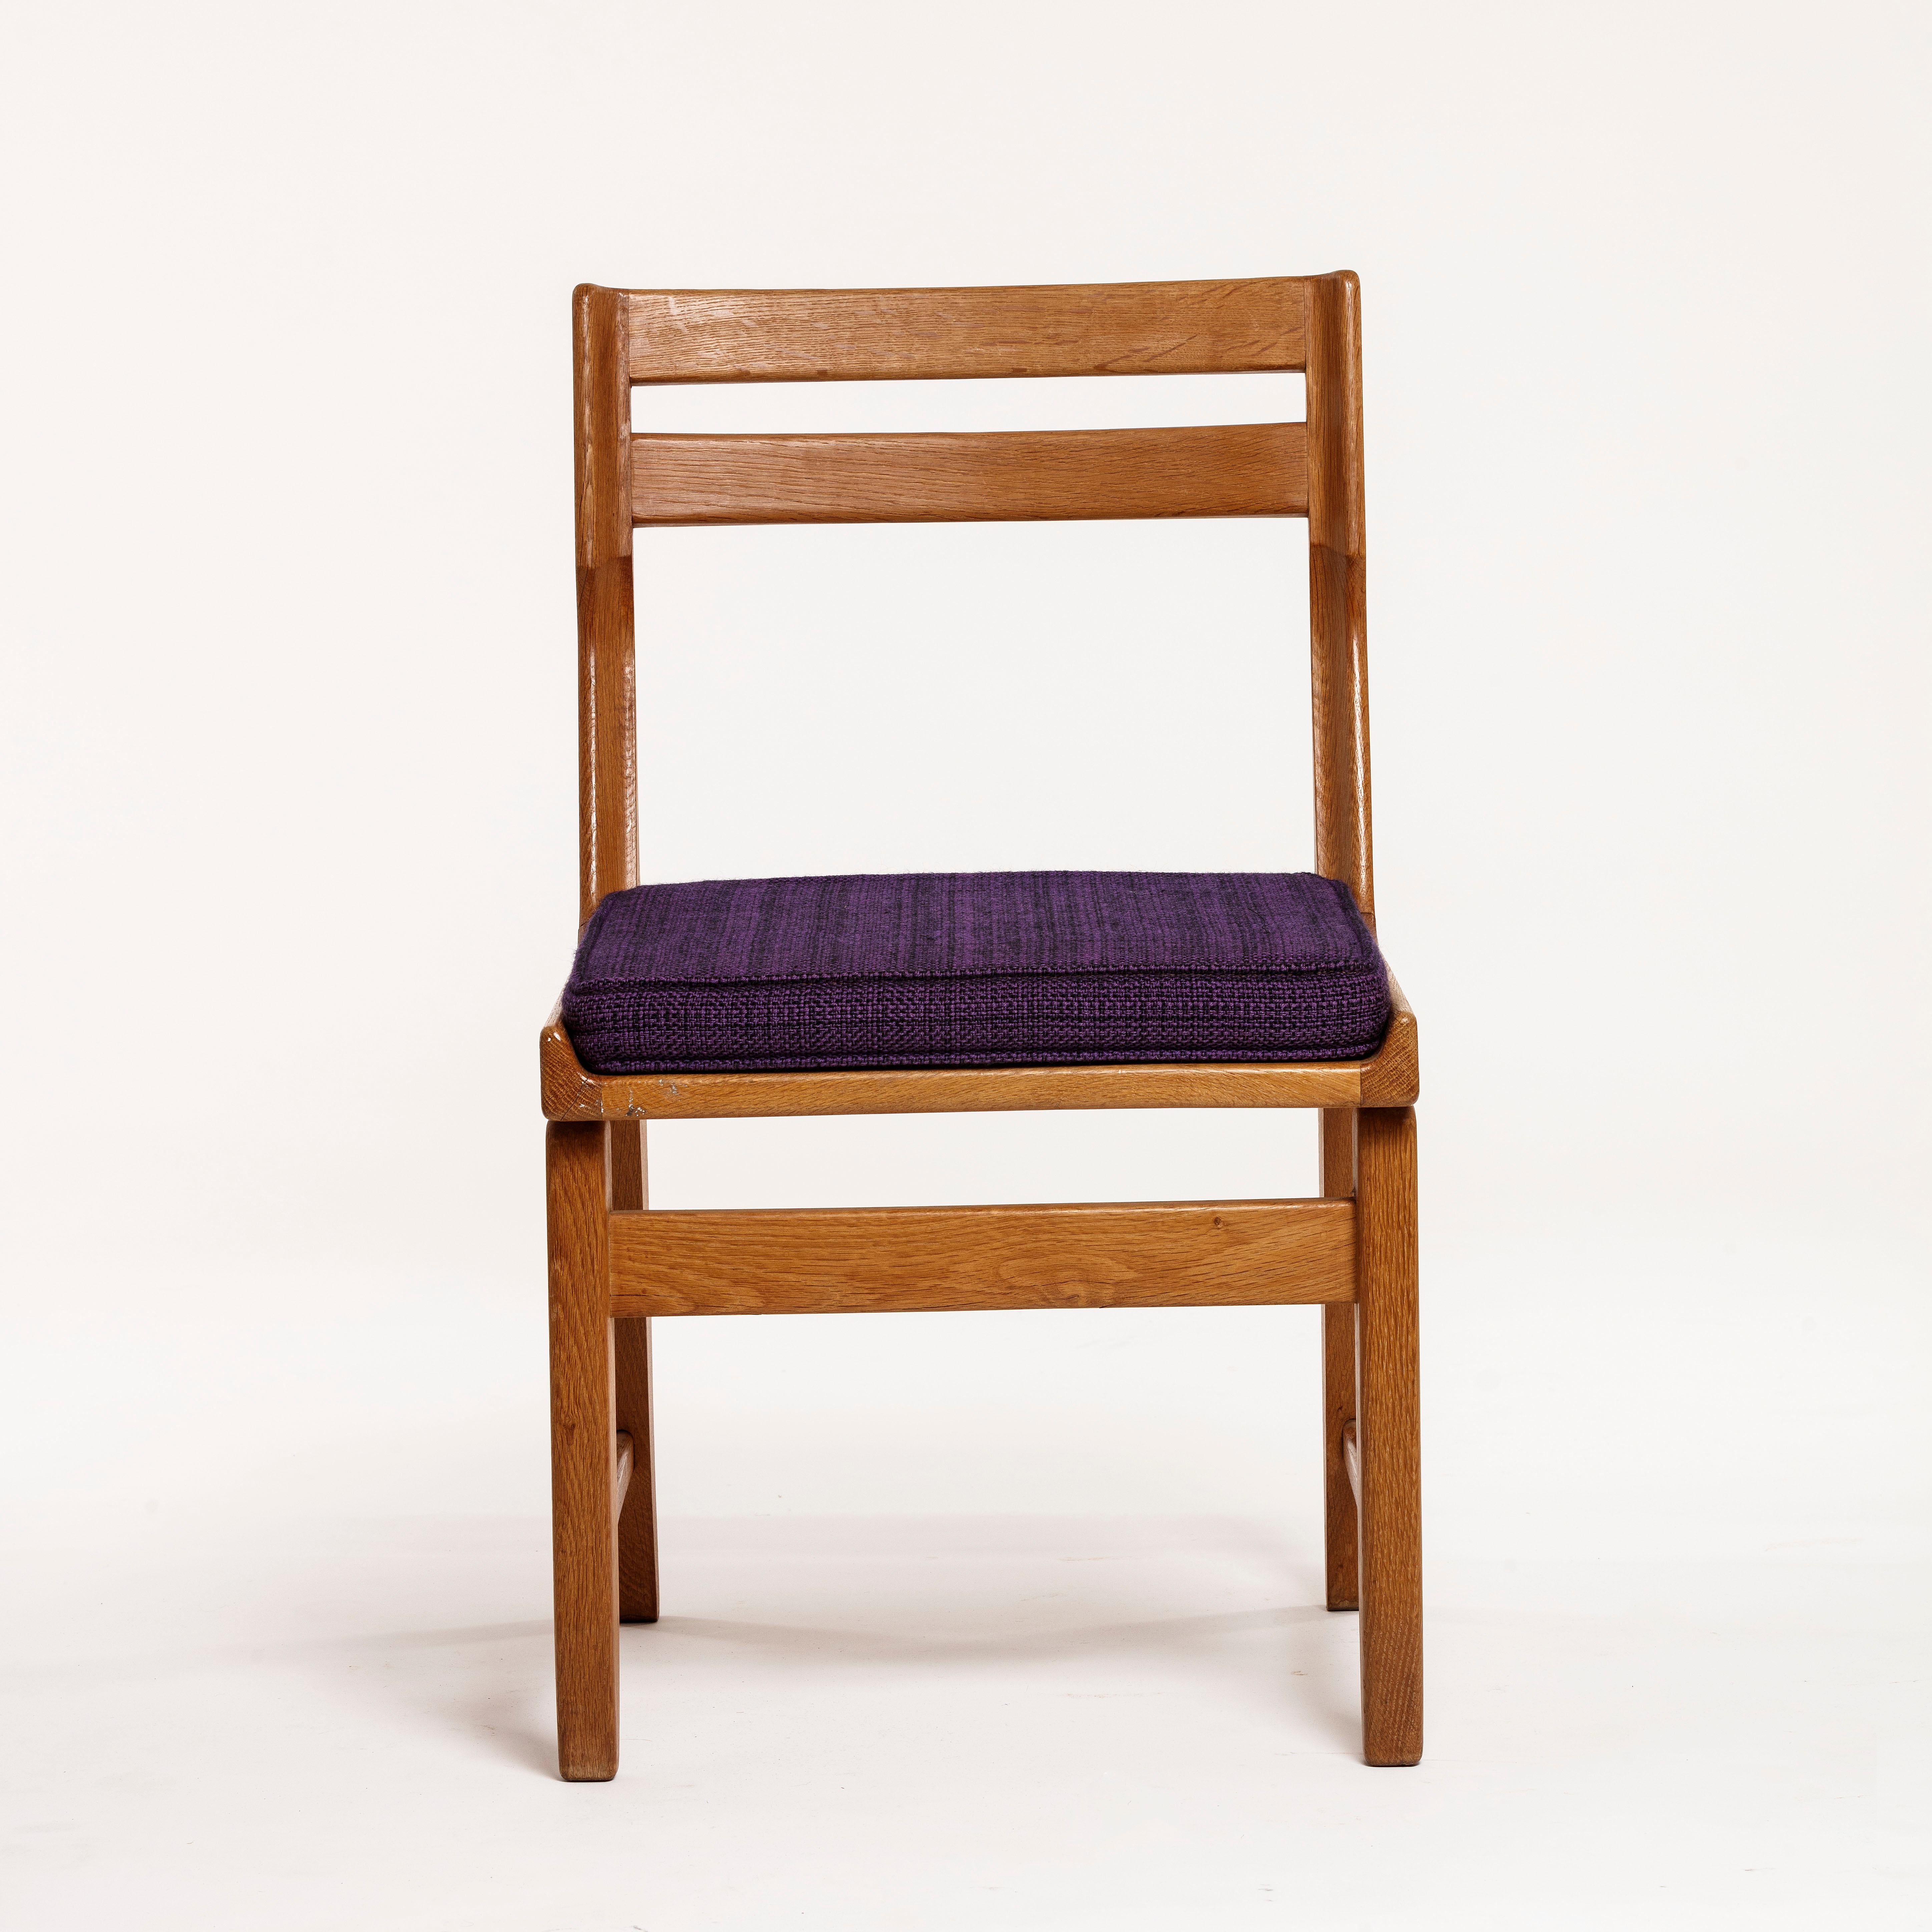 Guillerme et Chambron for Votre Maison, 2 dining chairs, model 'Raphaël', oak, velvet fabric upholstery, France, 1960s

typical traits of the designs by French designer duo Guillerme et Chambron. The frame features two horizontal slats and an